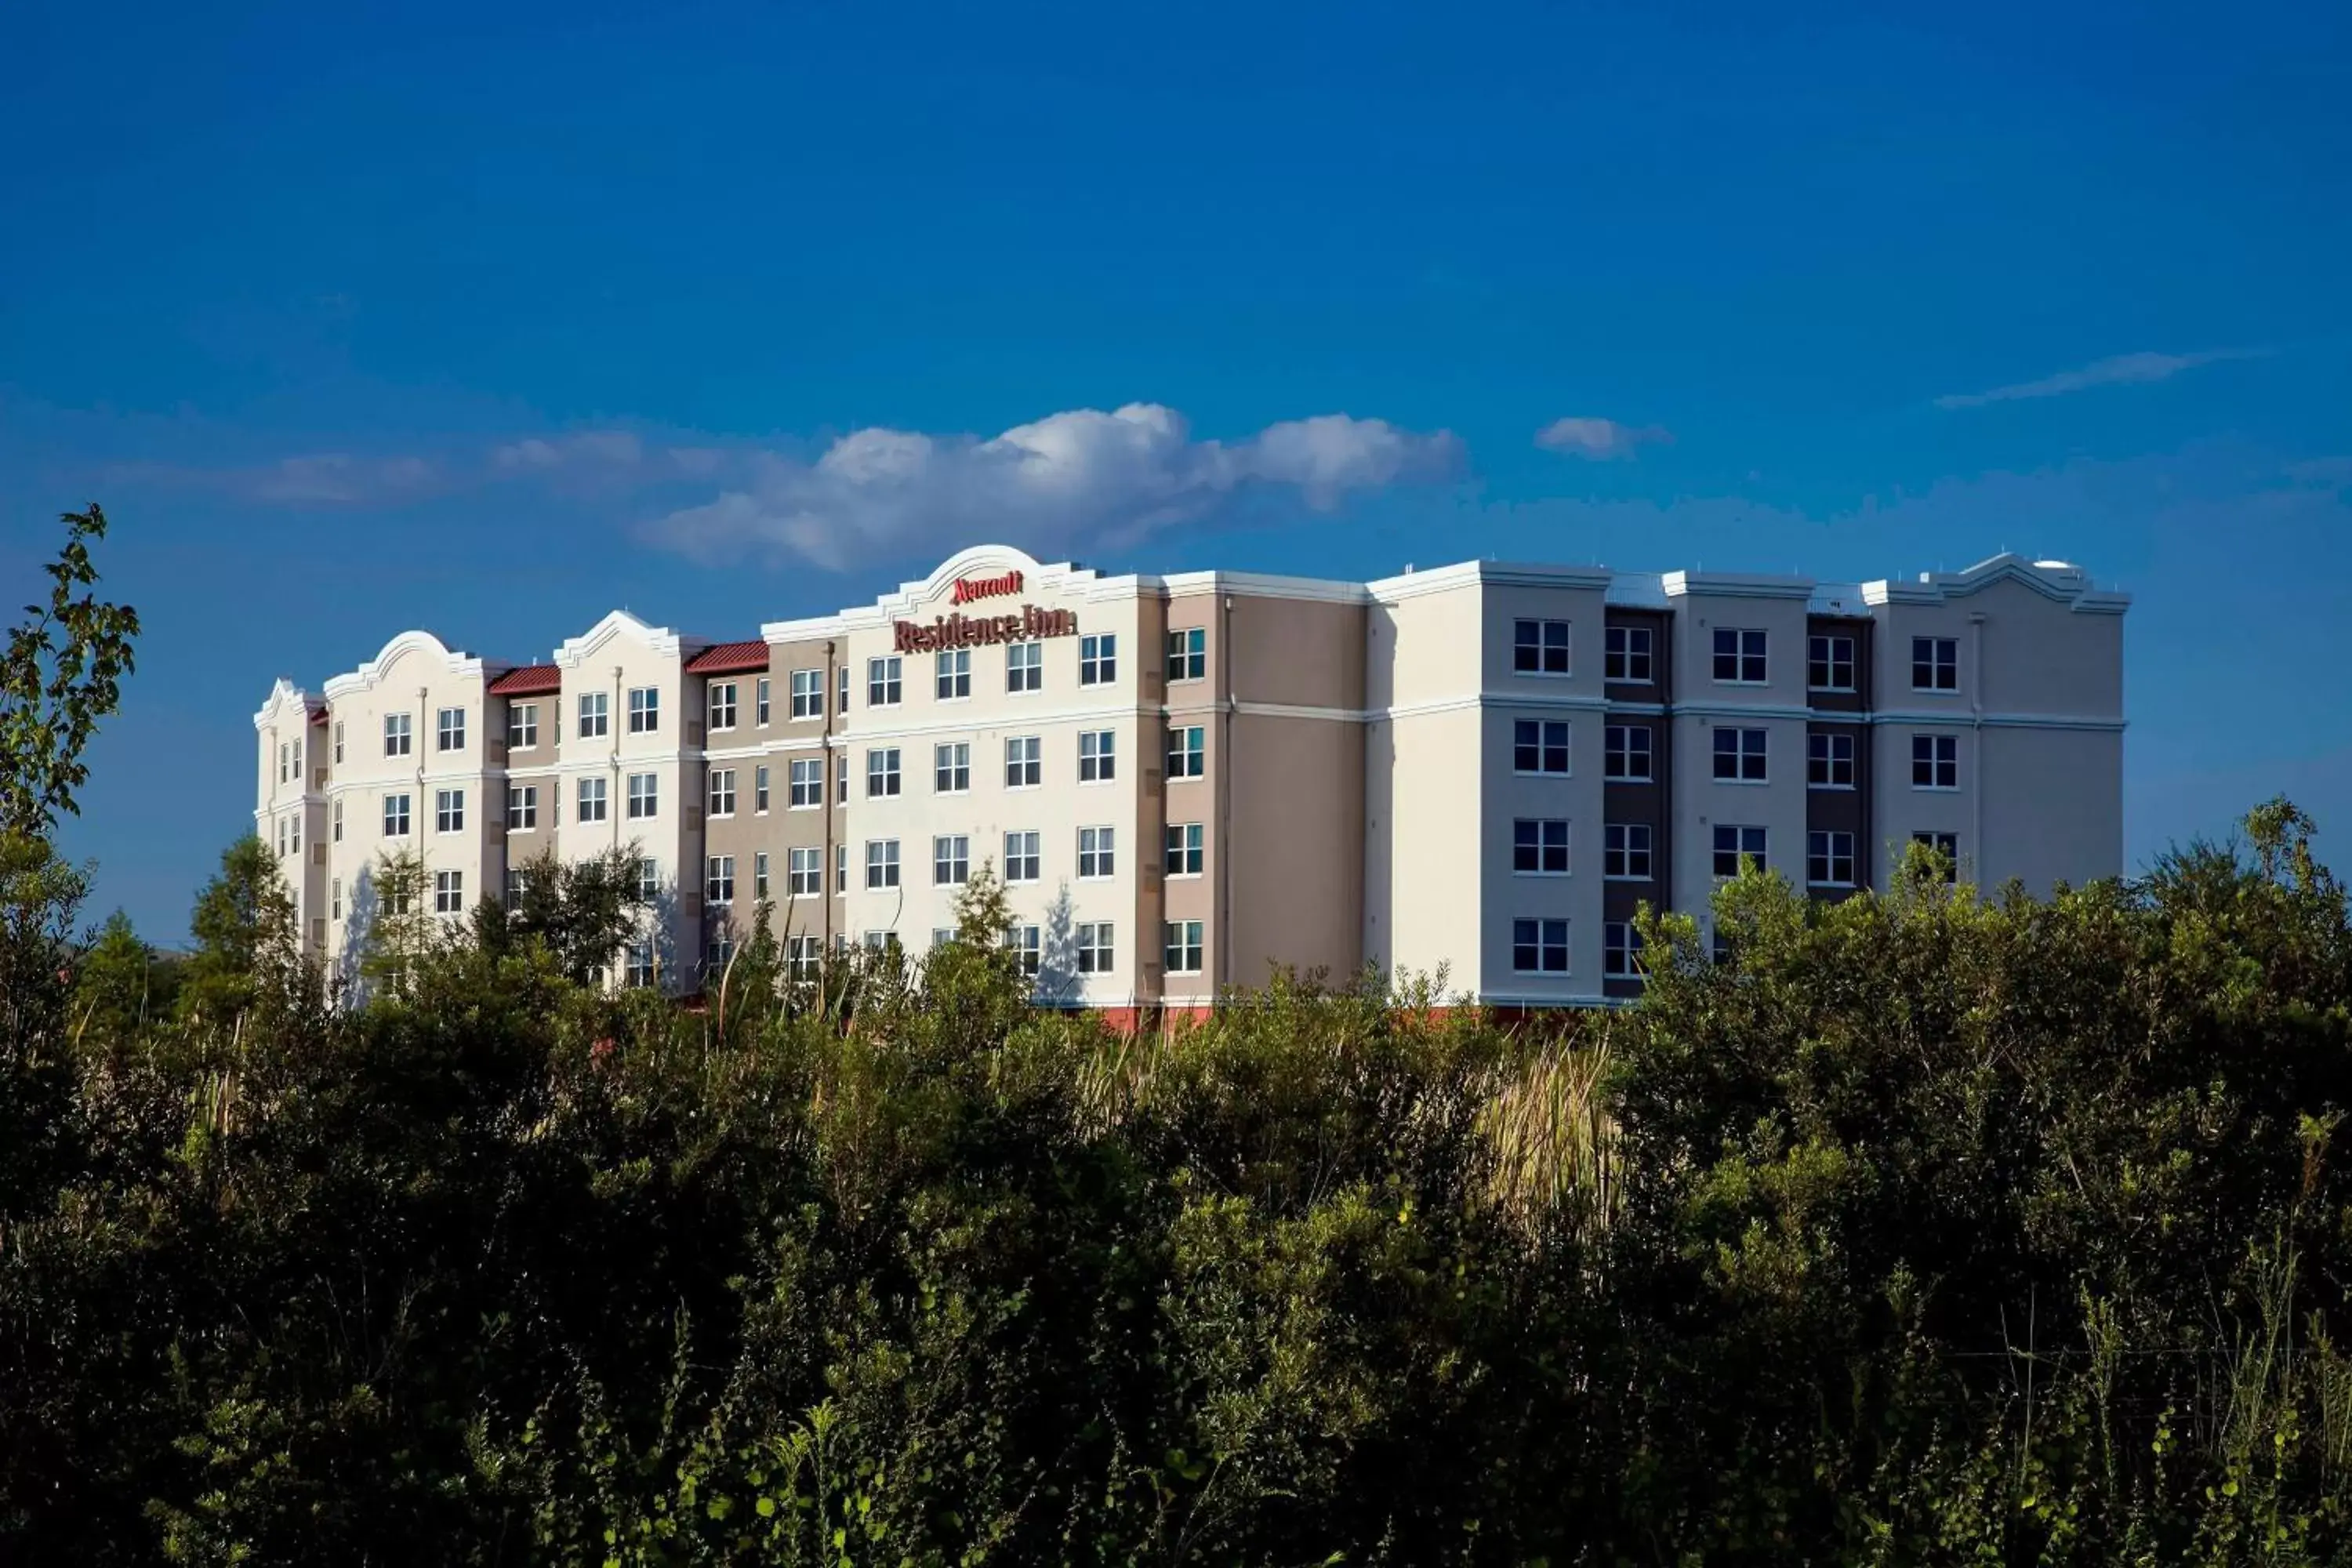 Property Building in Residence Inn Tampa Suncoast Parkway at NorthPointe Village